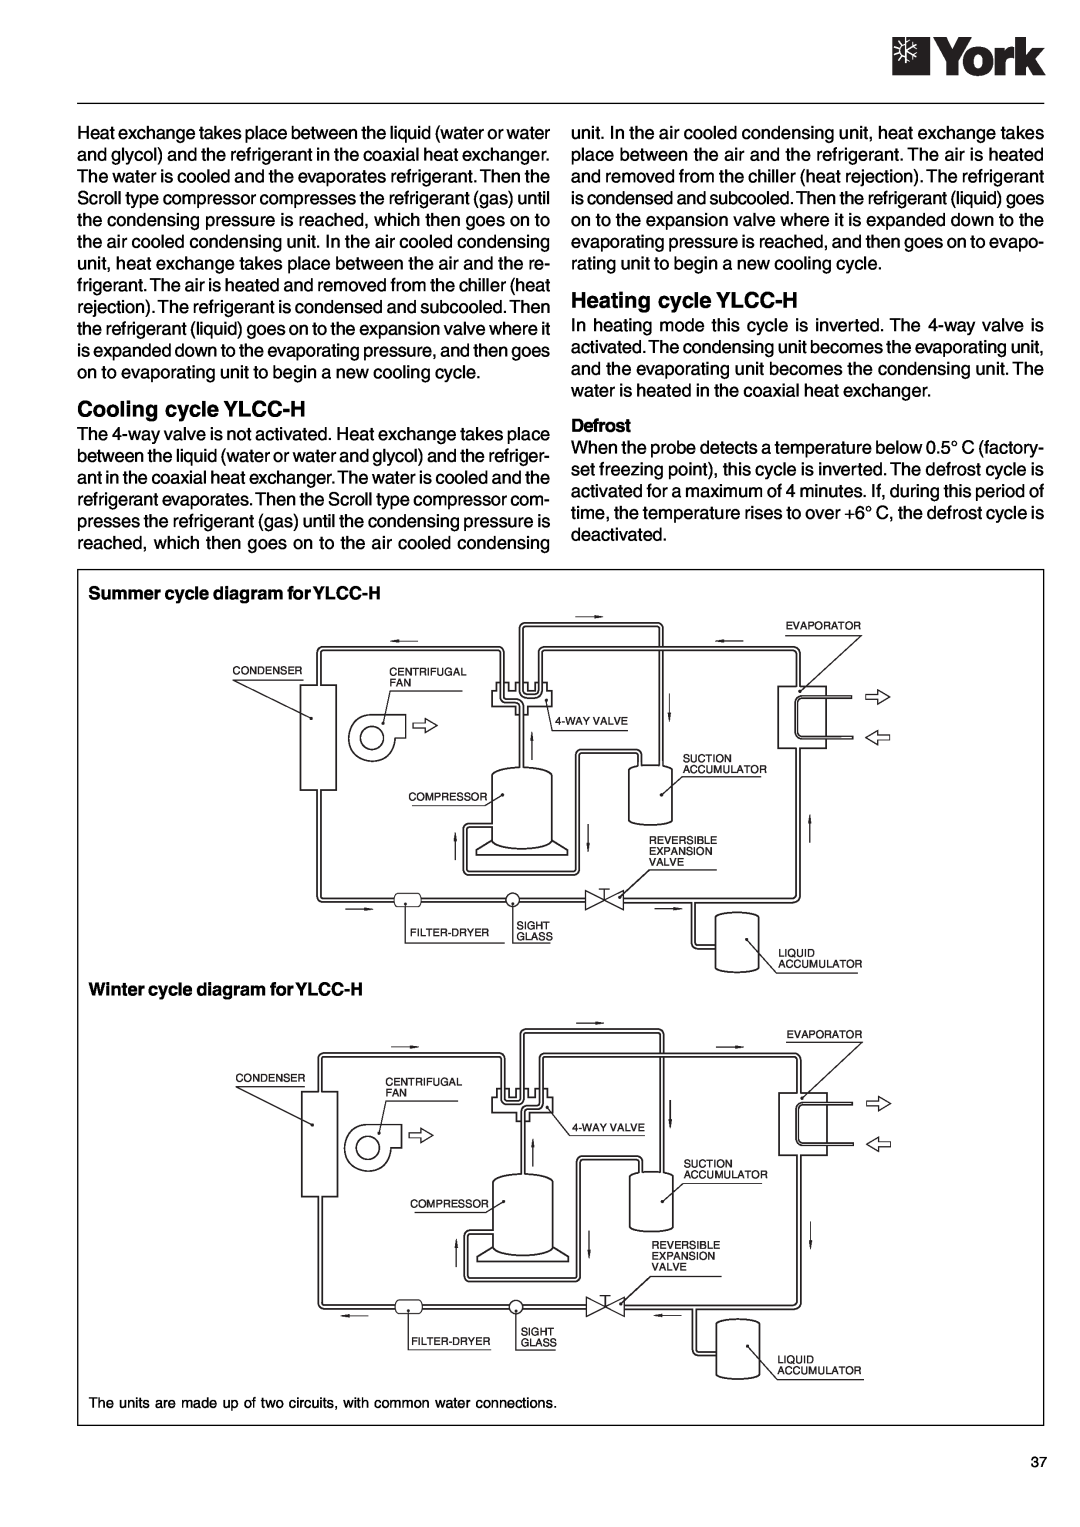 York YLCC-h, YLCC 42/62/82/102/112, 122 Heating cycle YLCC-H, Cooling cycle YLCC-H, Defrost, Summer cycle diagram forYLCC-H 